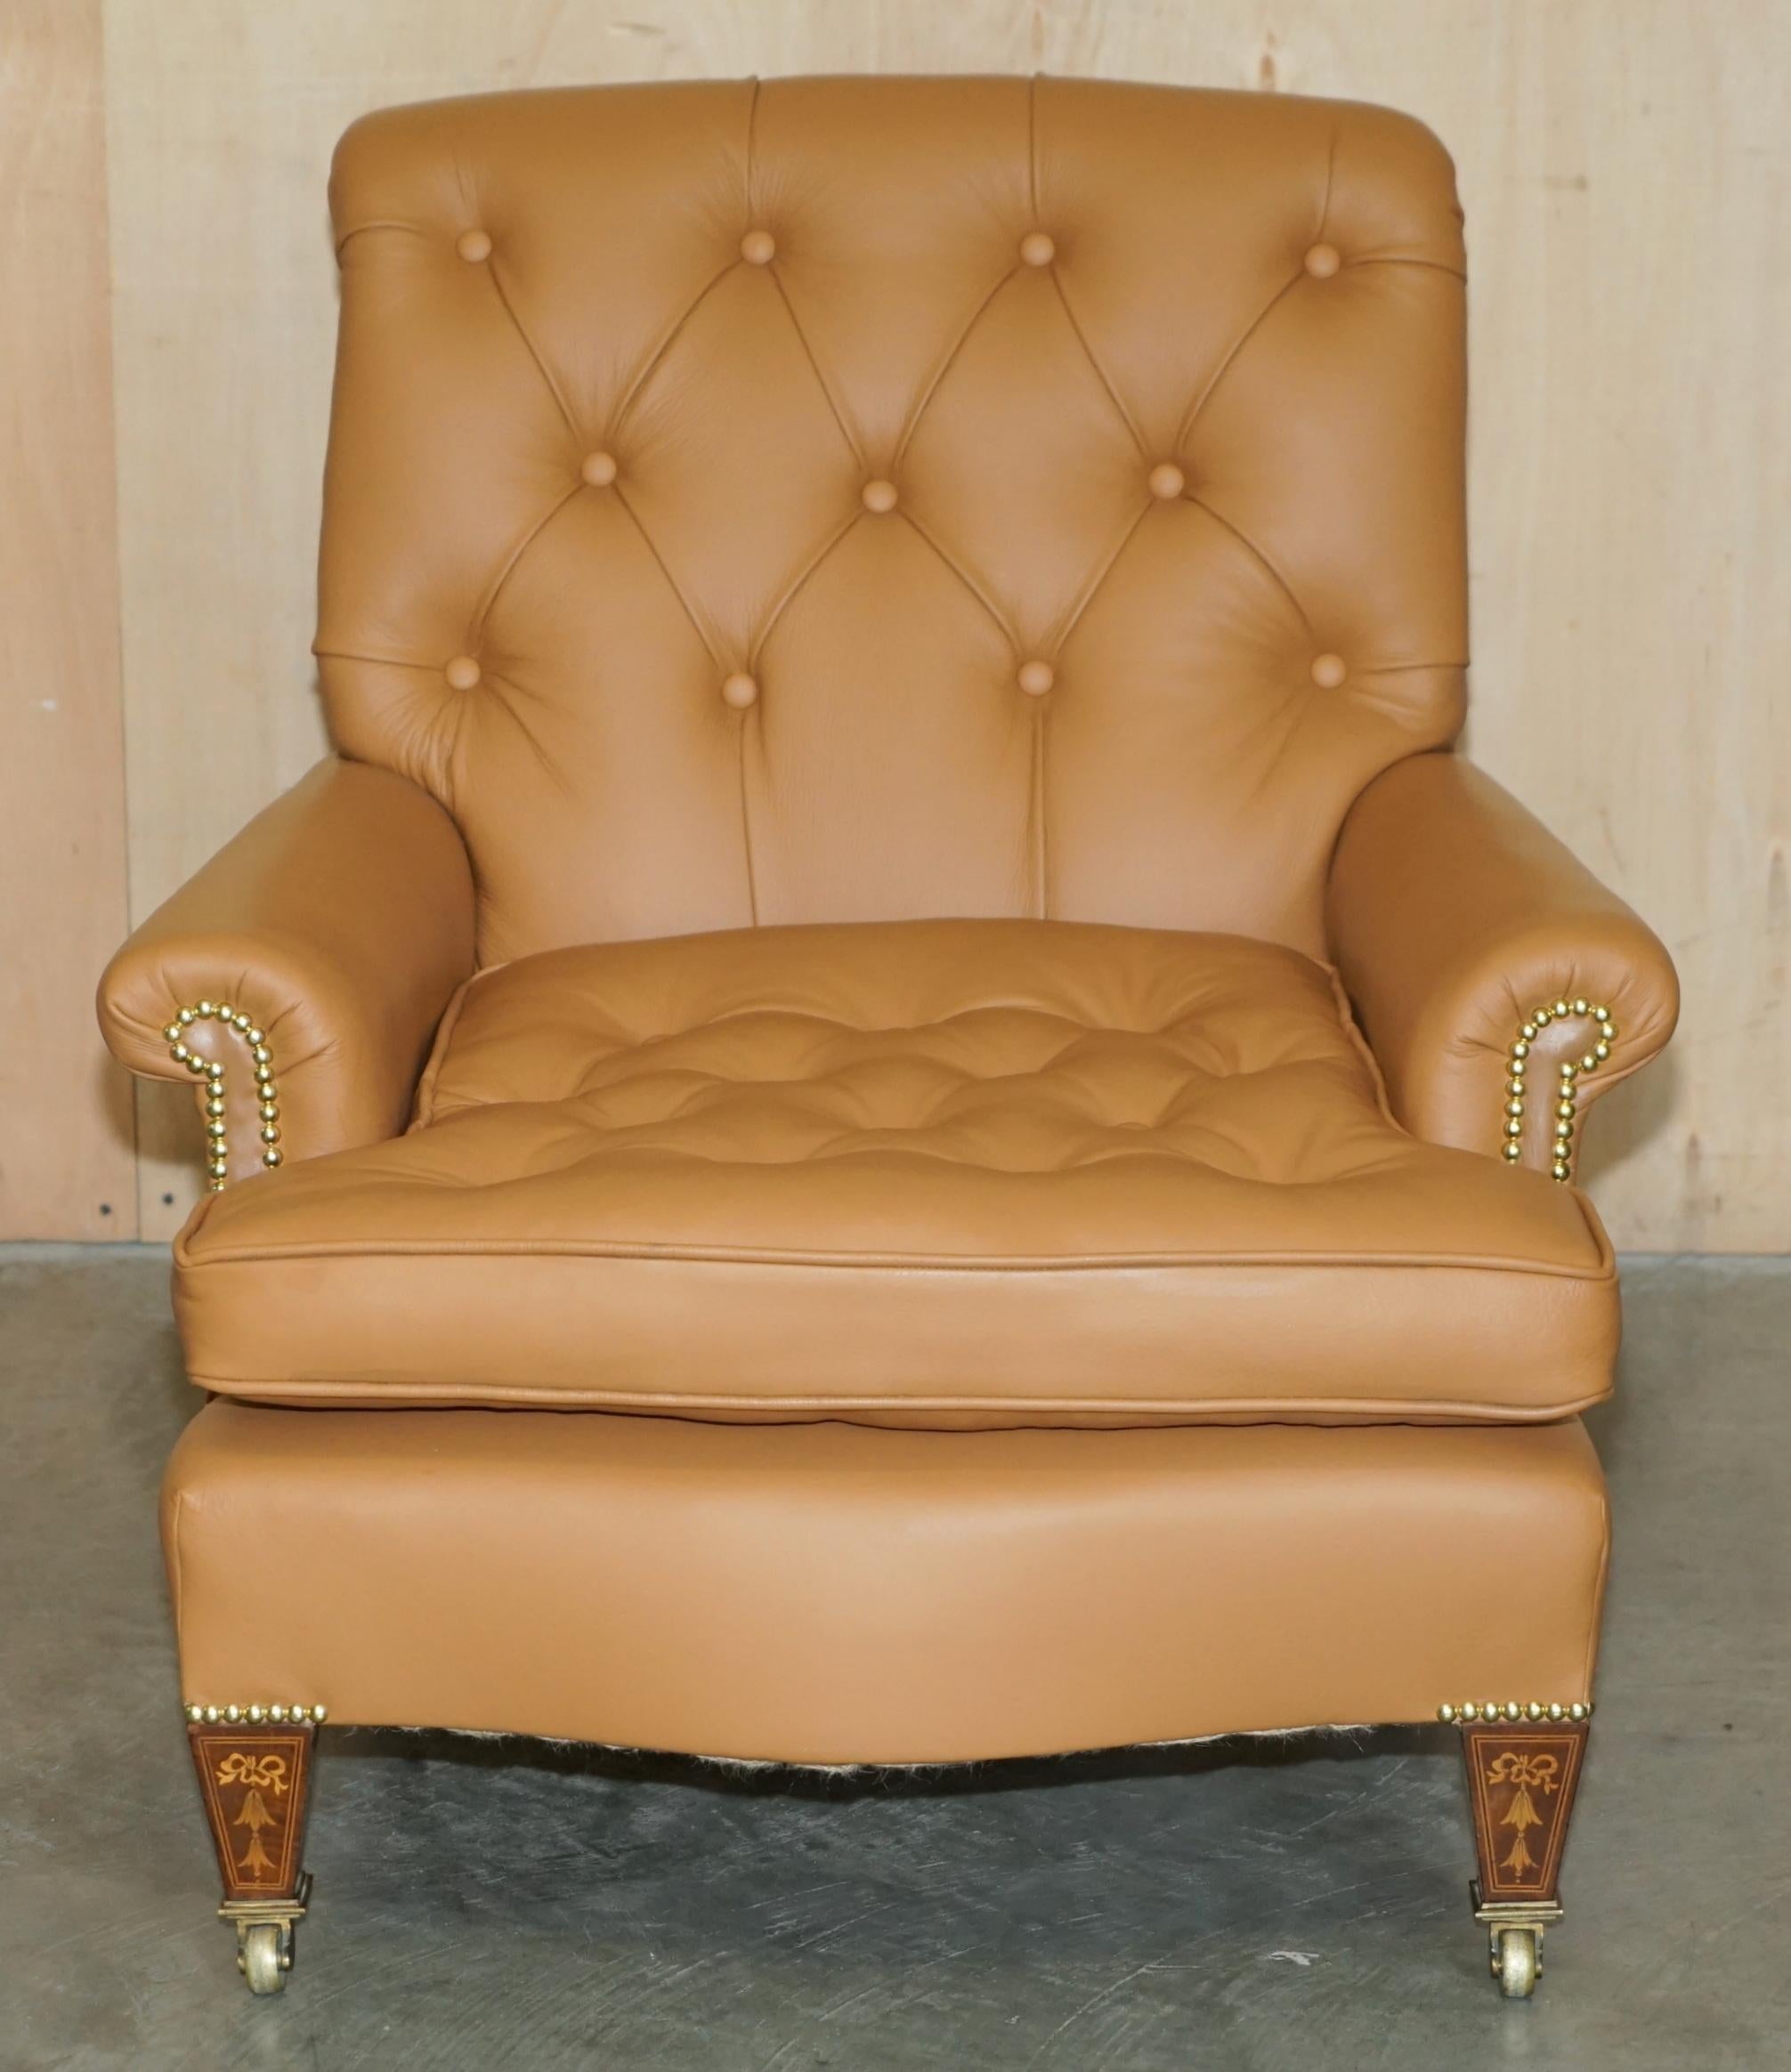 High Victorian SUPER RARE HOWARD & SON'S FULLY RESTORED CHESTERFiELD BROWN LEATHER ARMCHAIR For Sale